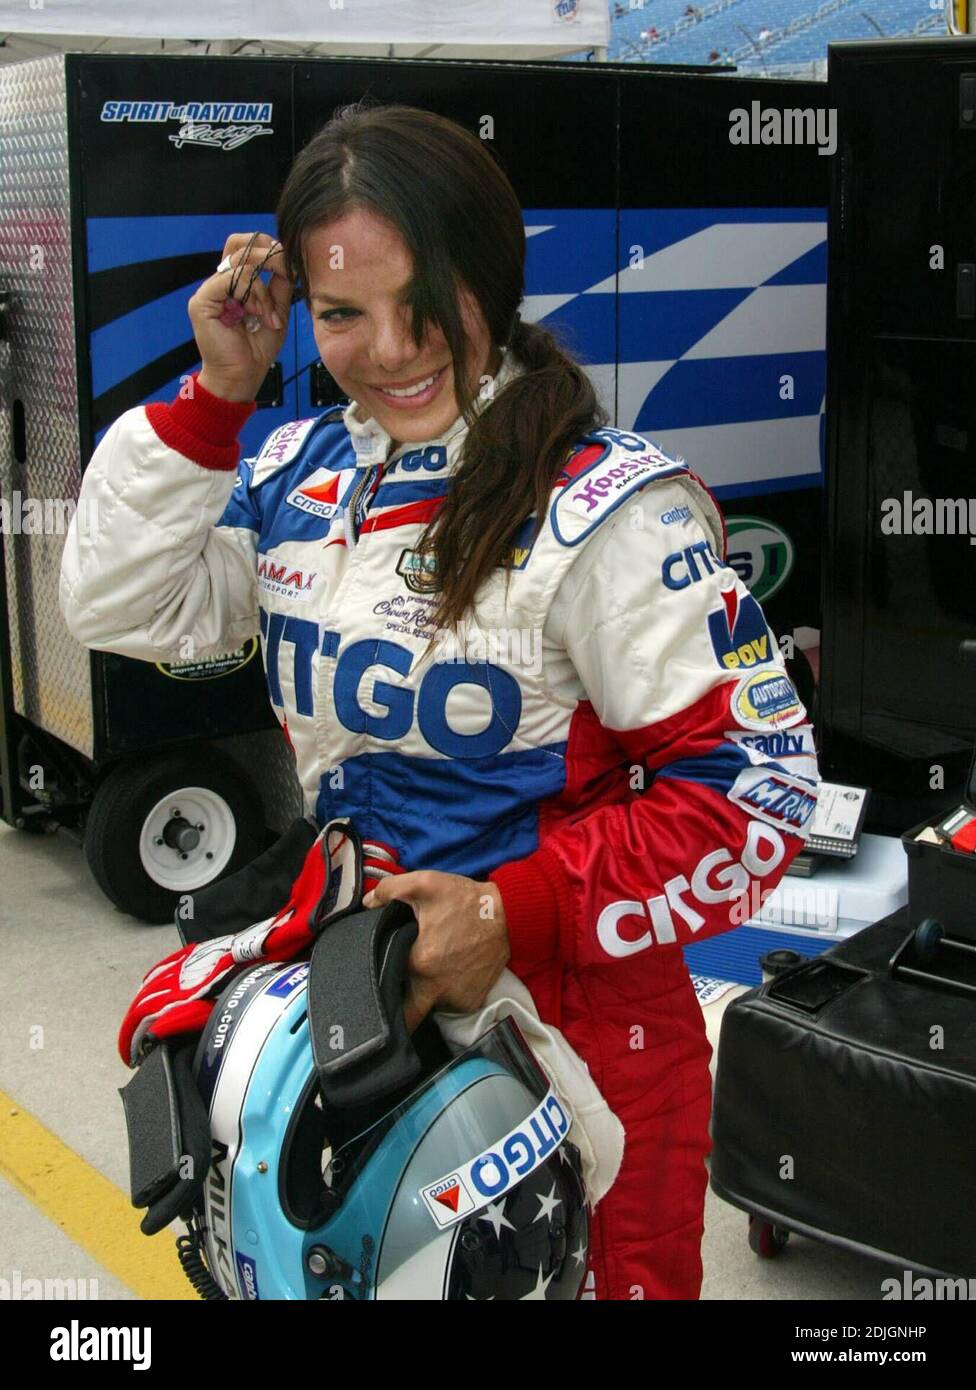 Danica Patrick at Toyota Indy 300 weekend at Homestead Miami Speedway. Indy Pro Series Qualifying. 03/24/06 Stock Photo